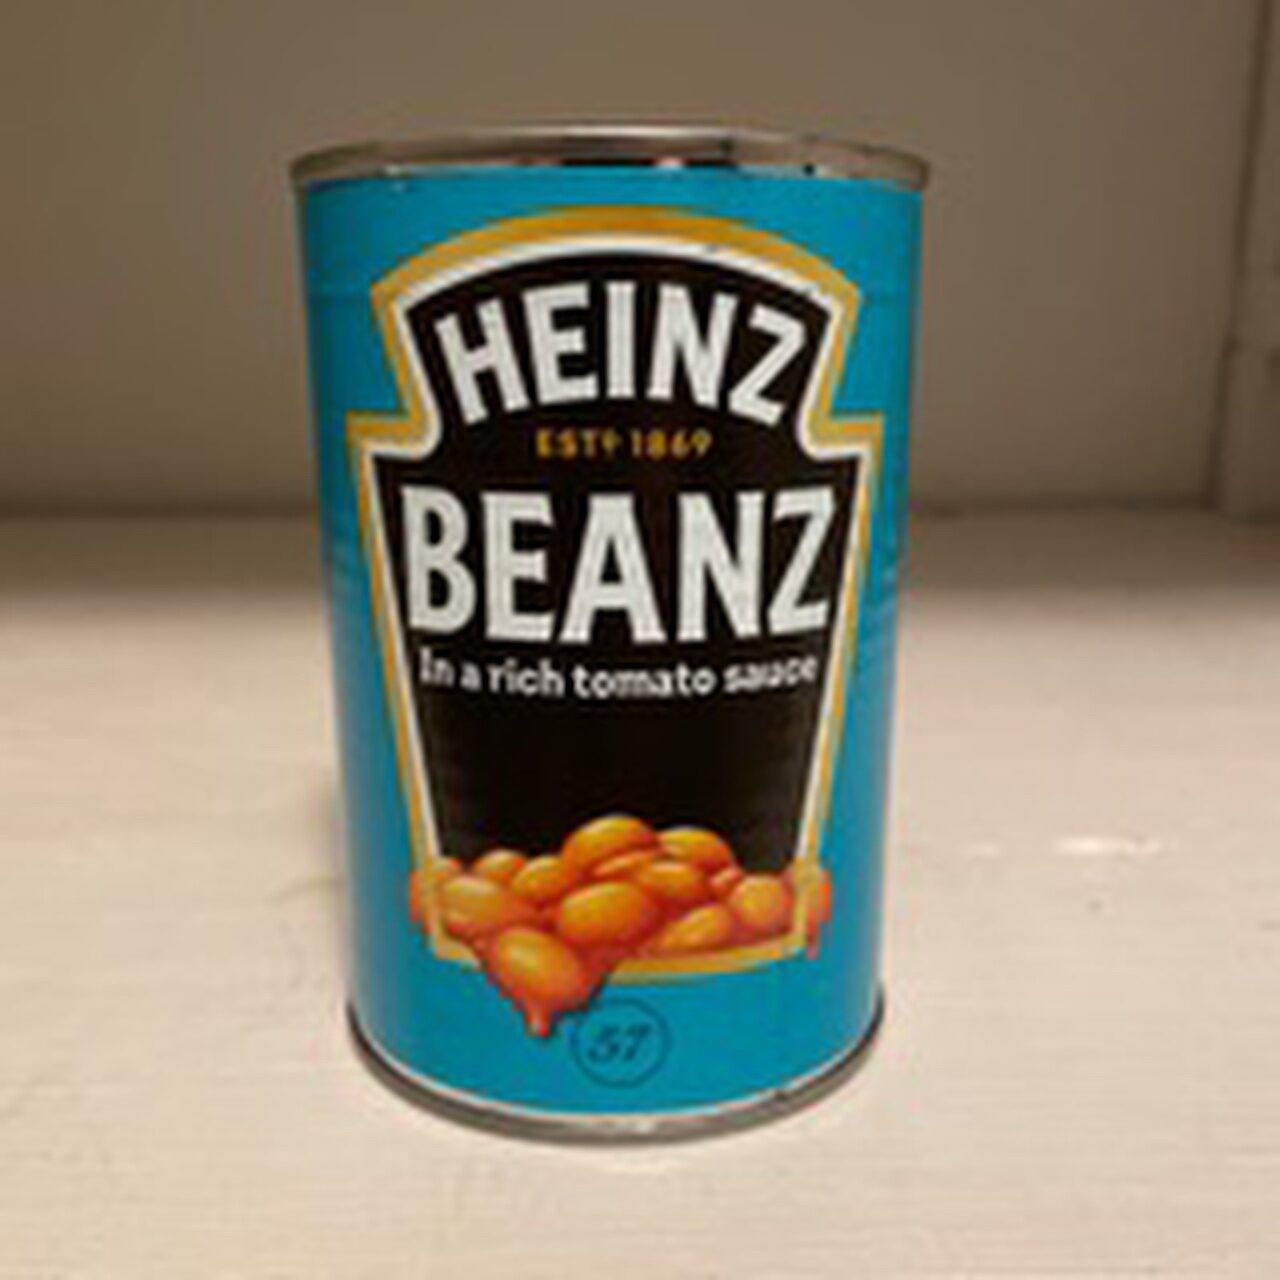 Heinz Beanz In a rich tomato sauce - Product